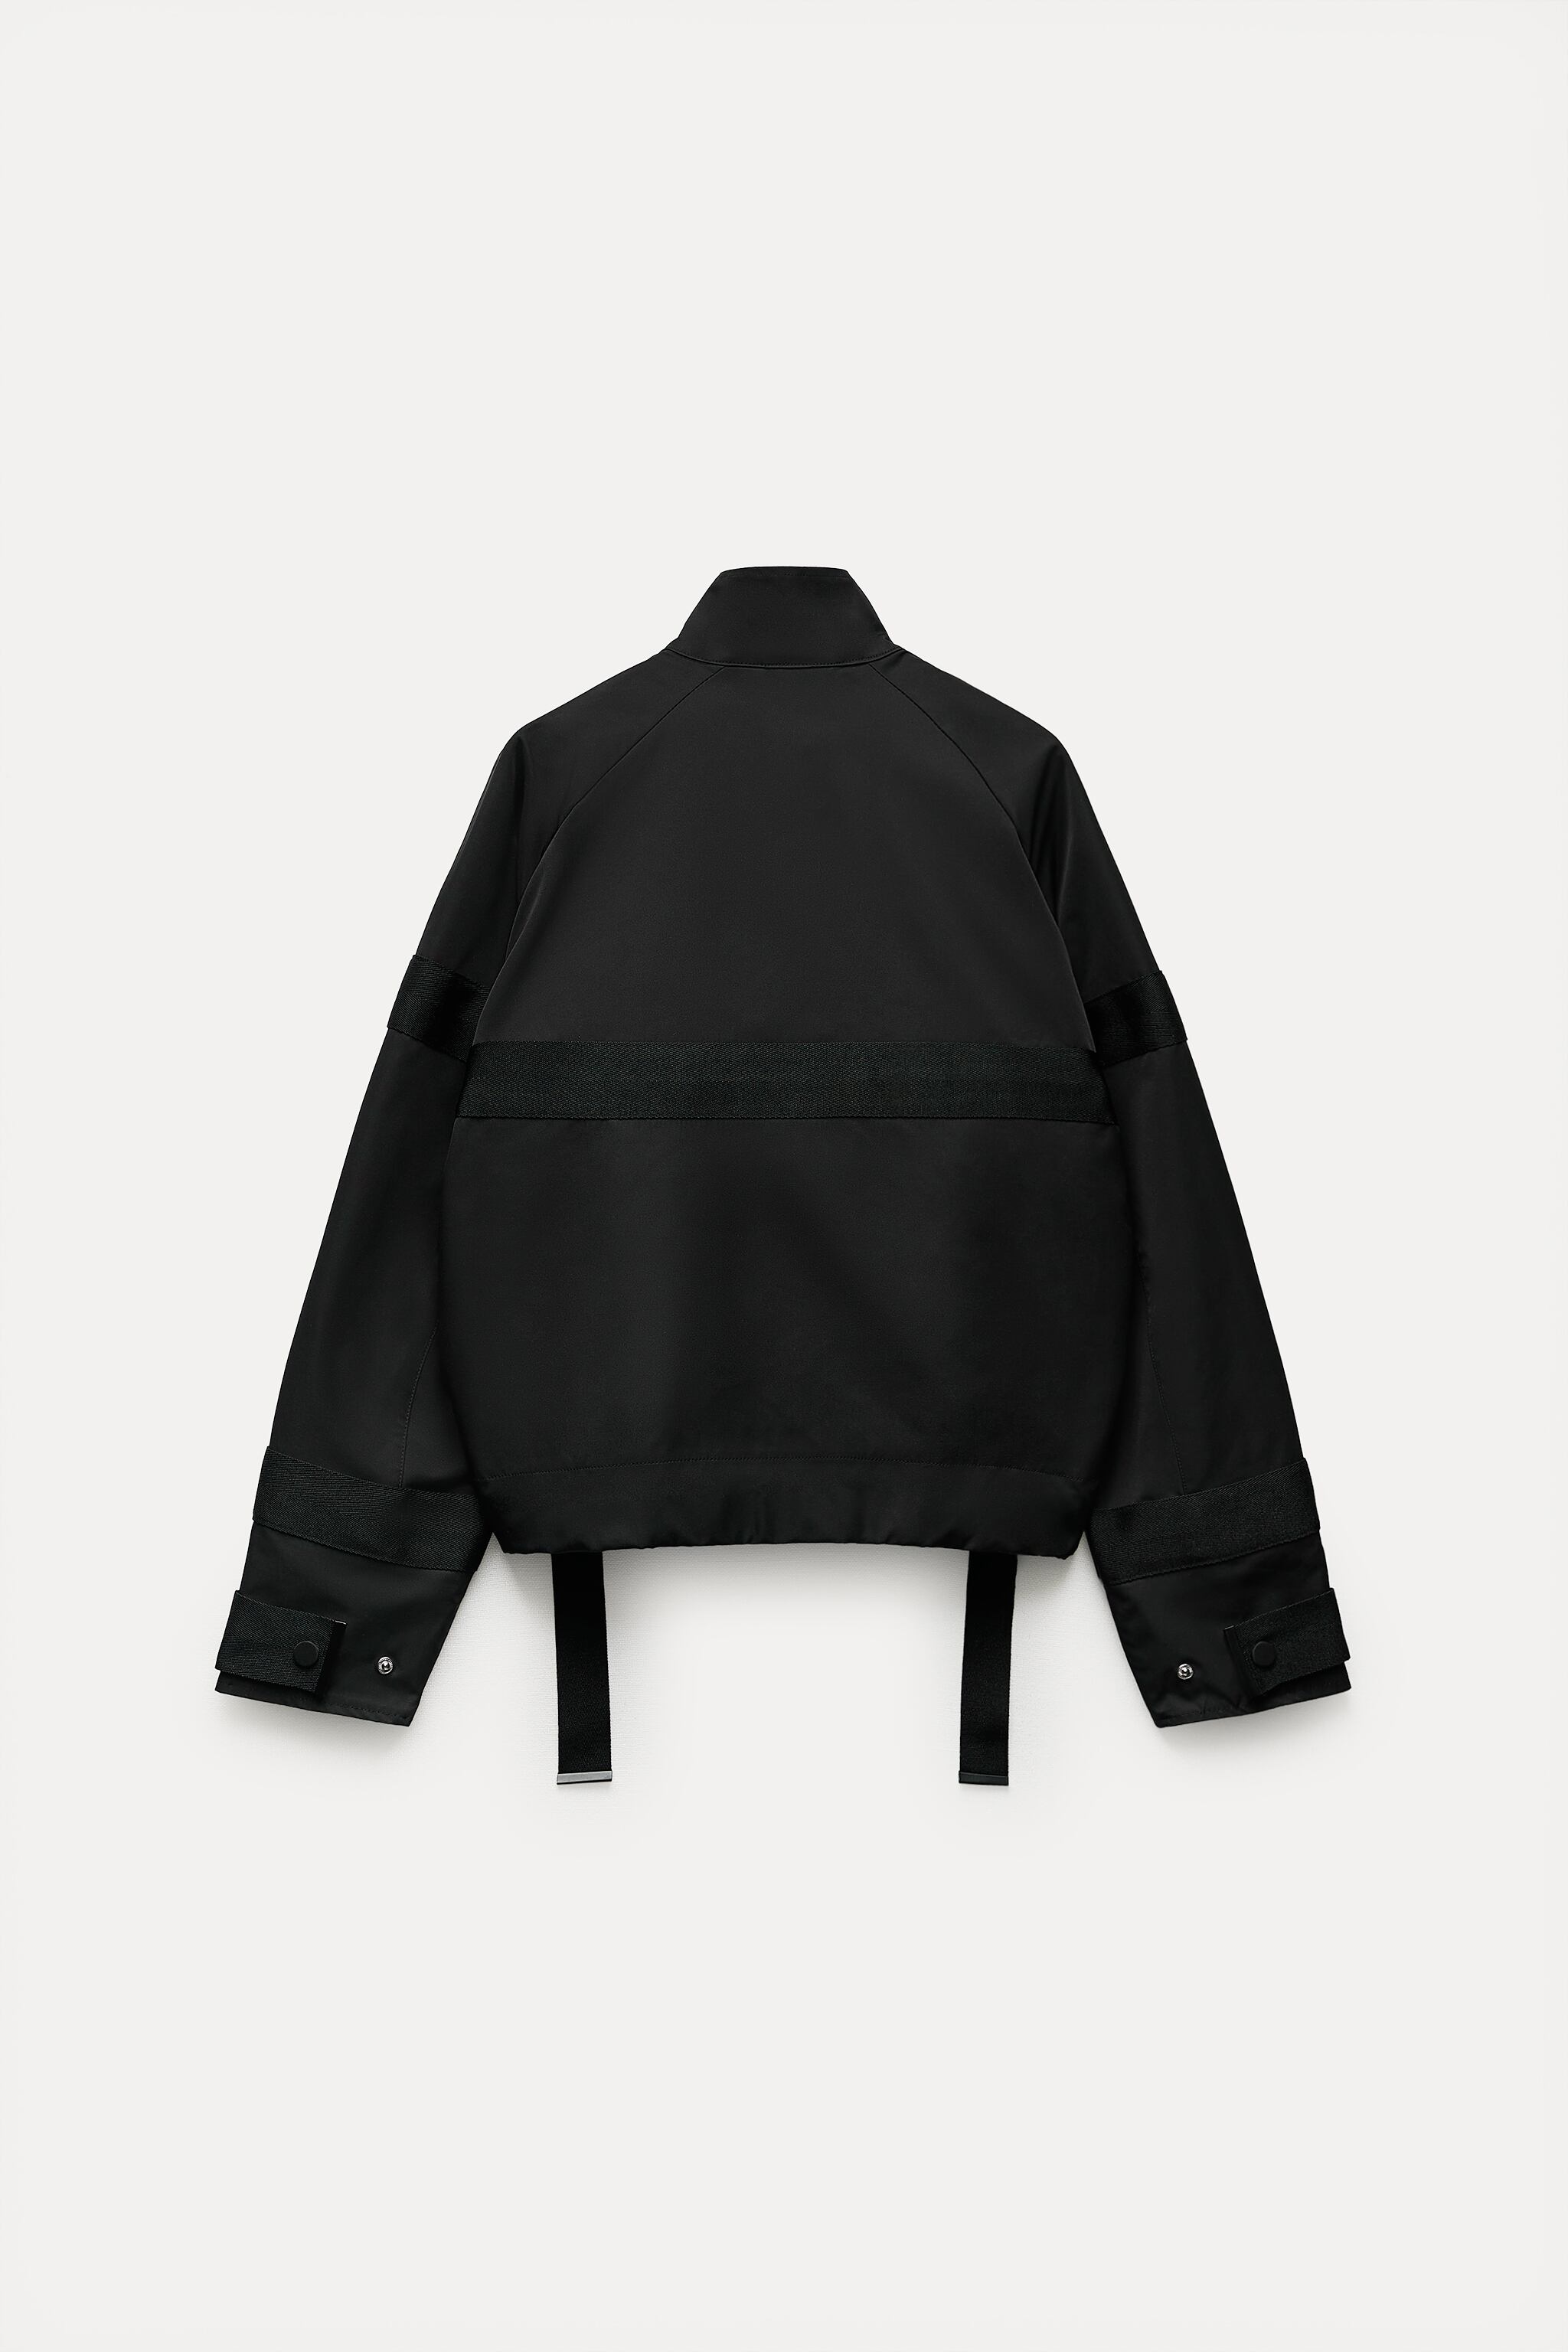 ZW COLLECTION BUCKLED BOMBER